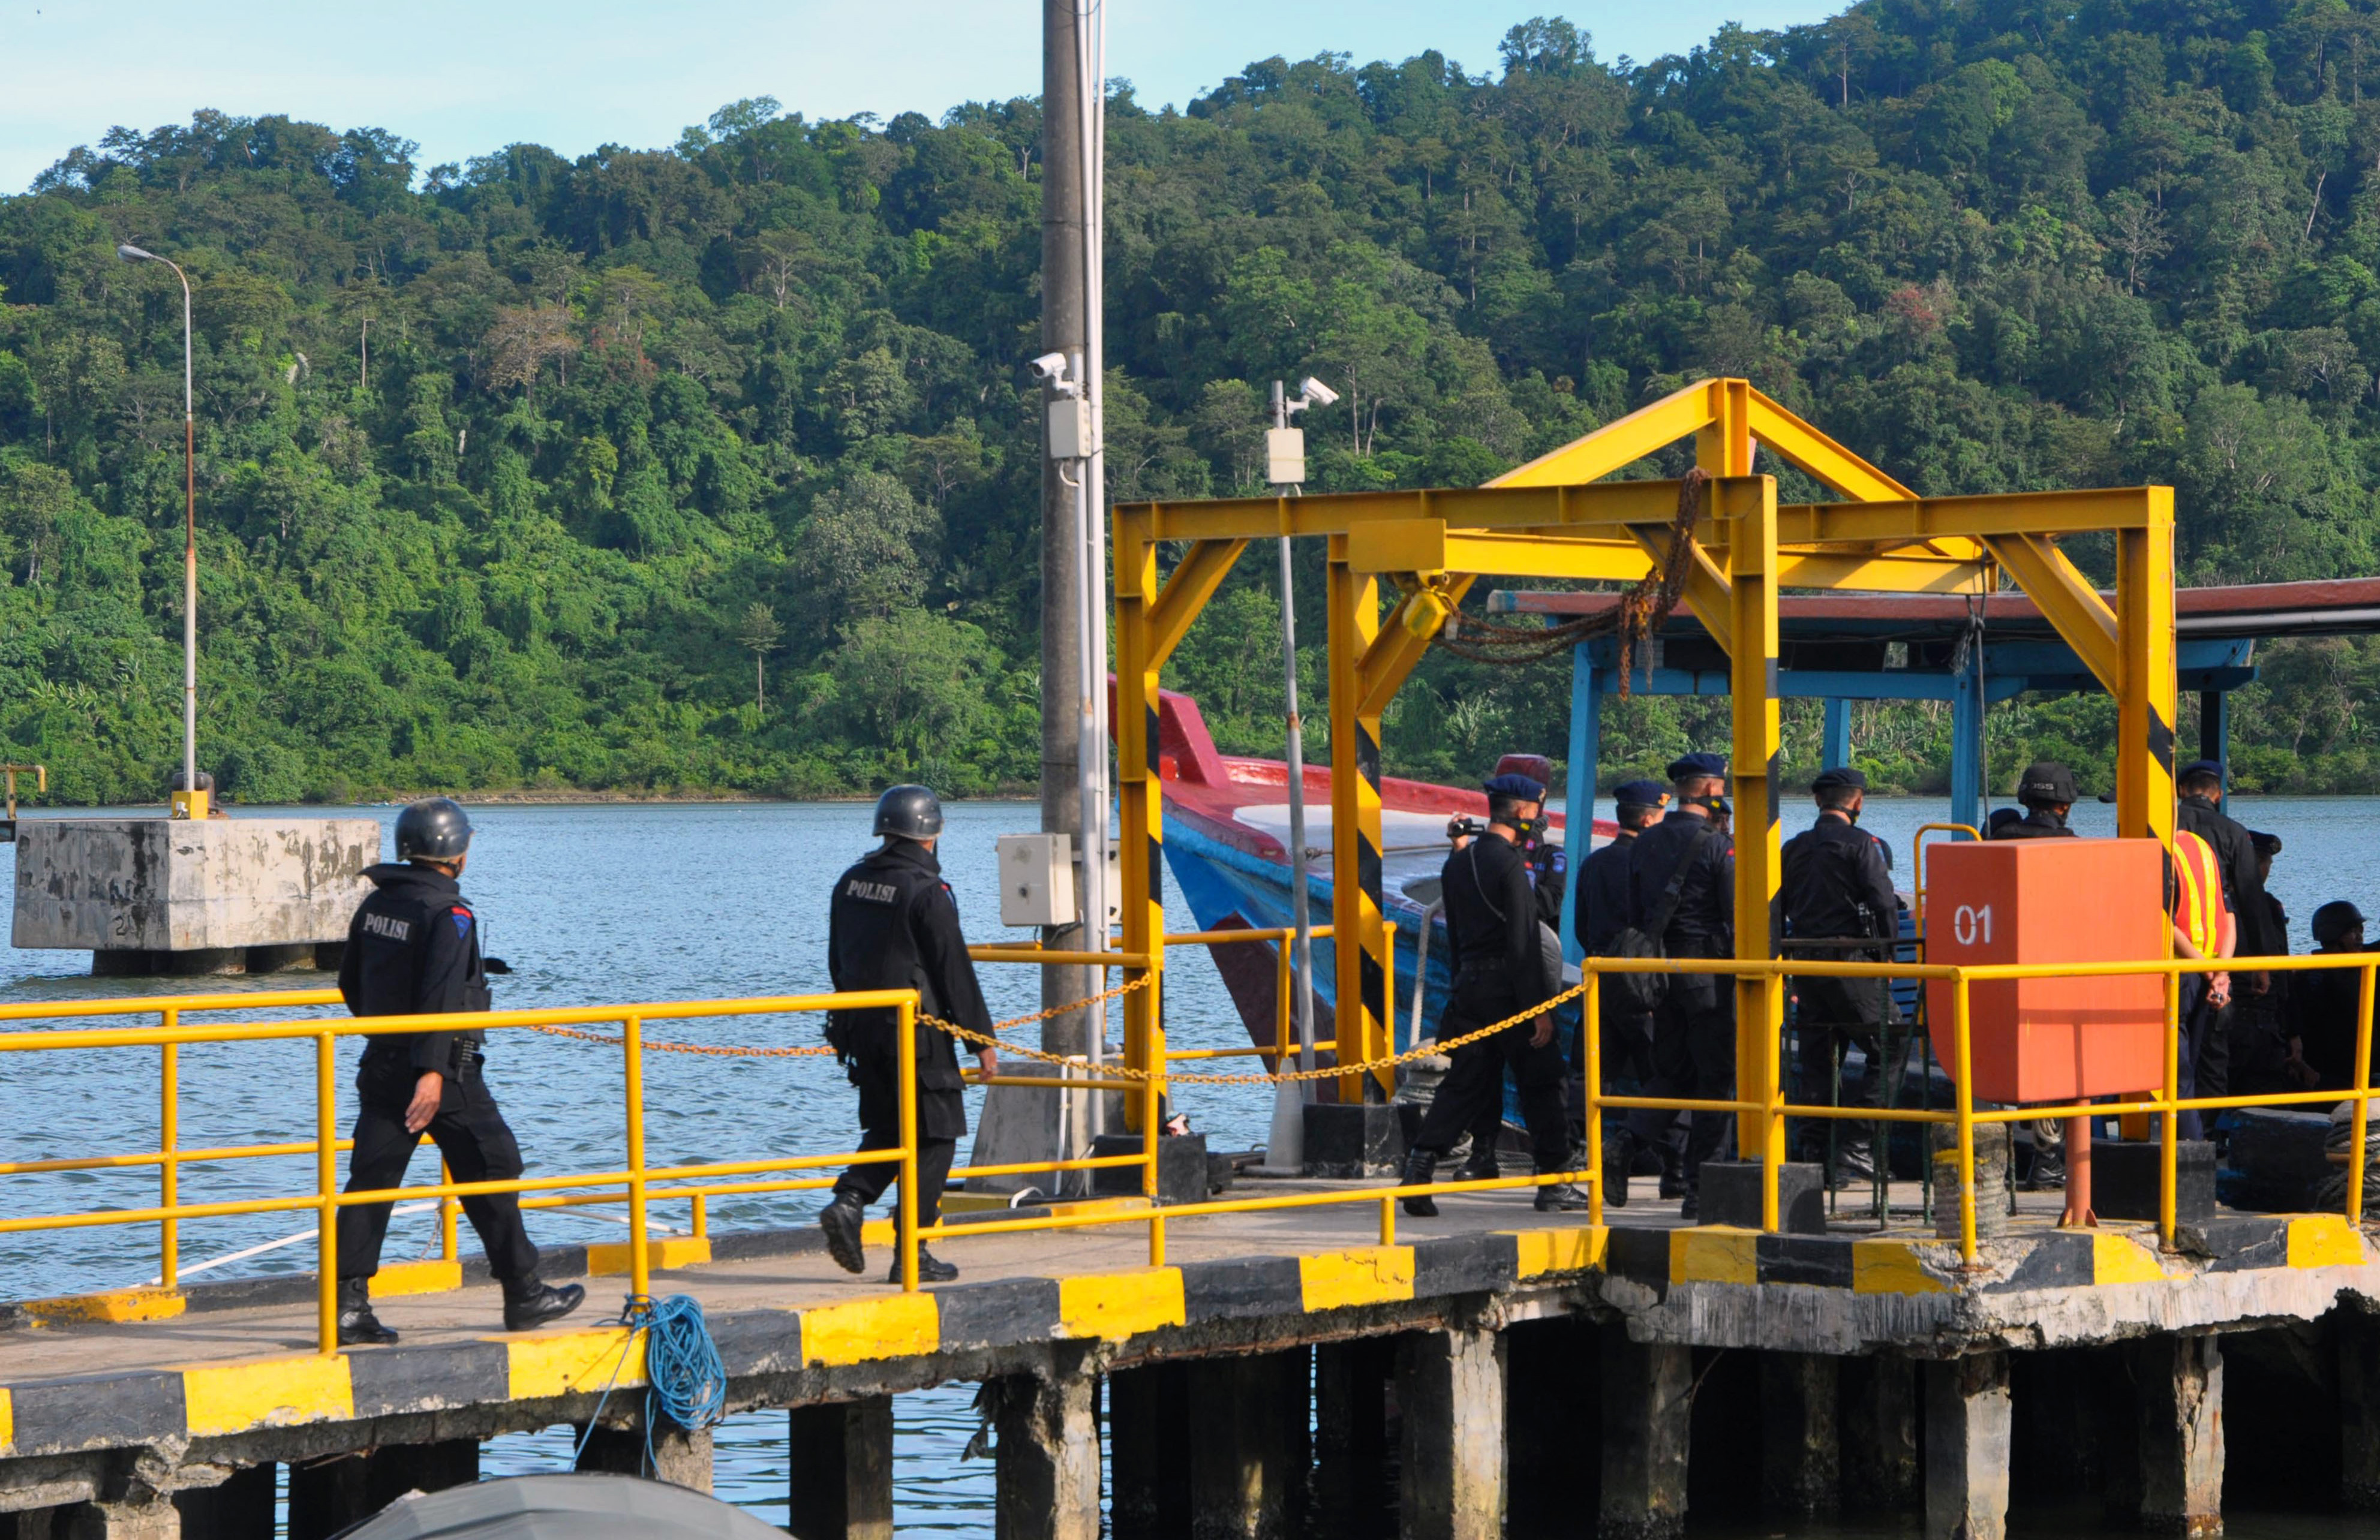 An Indonesian police firing squad boards a boat in Cilacap to cross to Nusakambangan maximum security prison island on April 28, 2015, ahead of the planned execution of drug convicts. Indonesia geared up to execute eight foreign drug convicts by firing squad after midnight April 28, despite a firestorm of international criticism and heartrending last-ditch pleas by the condemned prisoners' families.   AFP PHOTO / AZKA / AFP PHOTO / AZKA